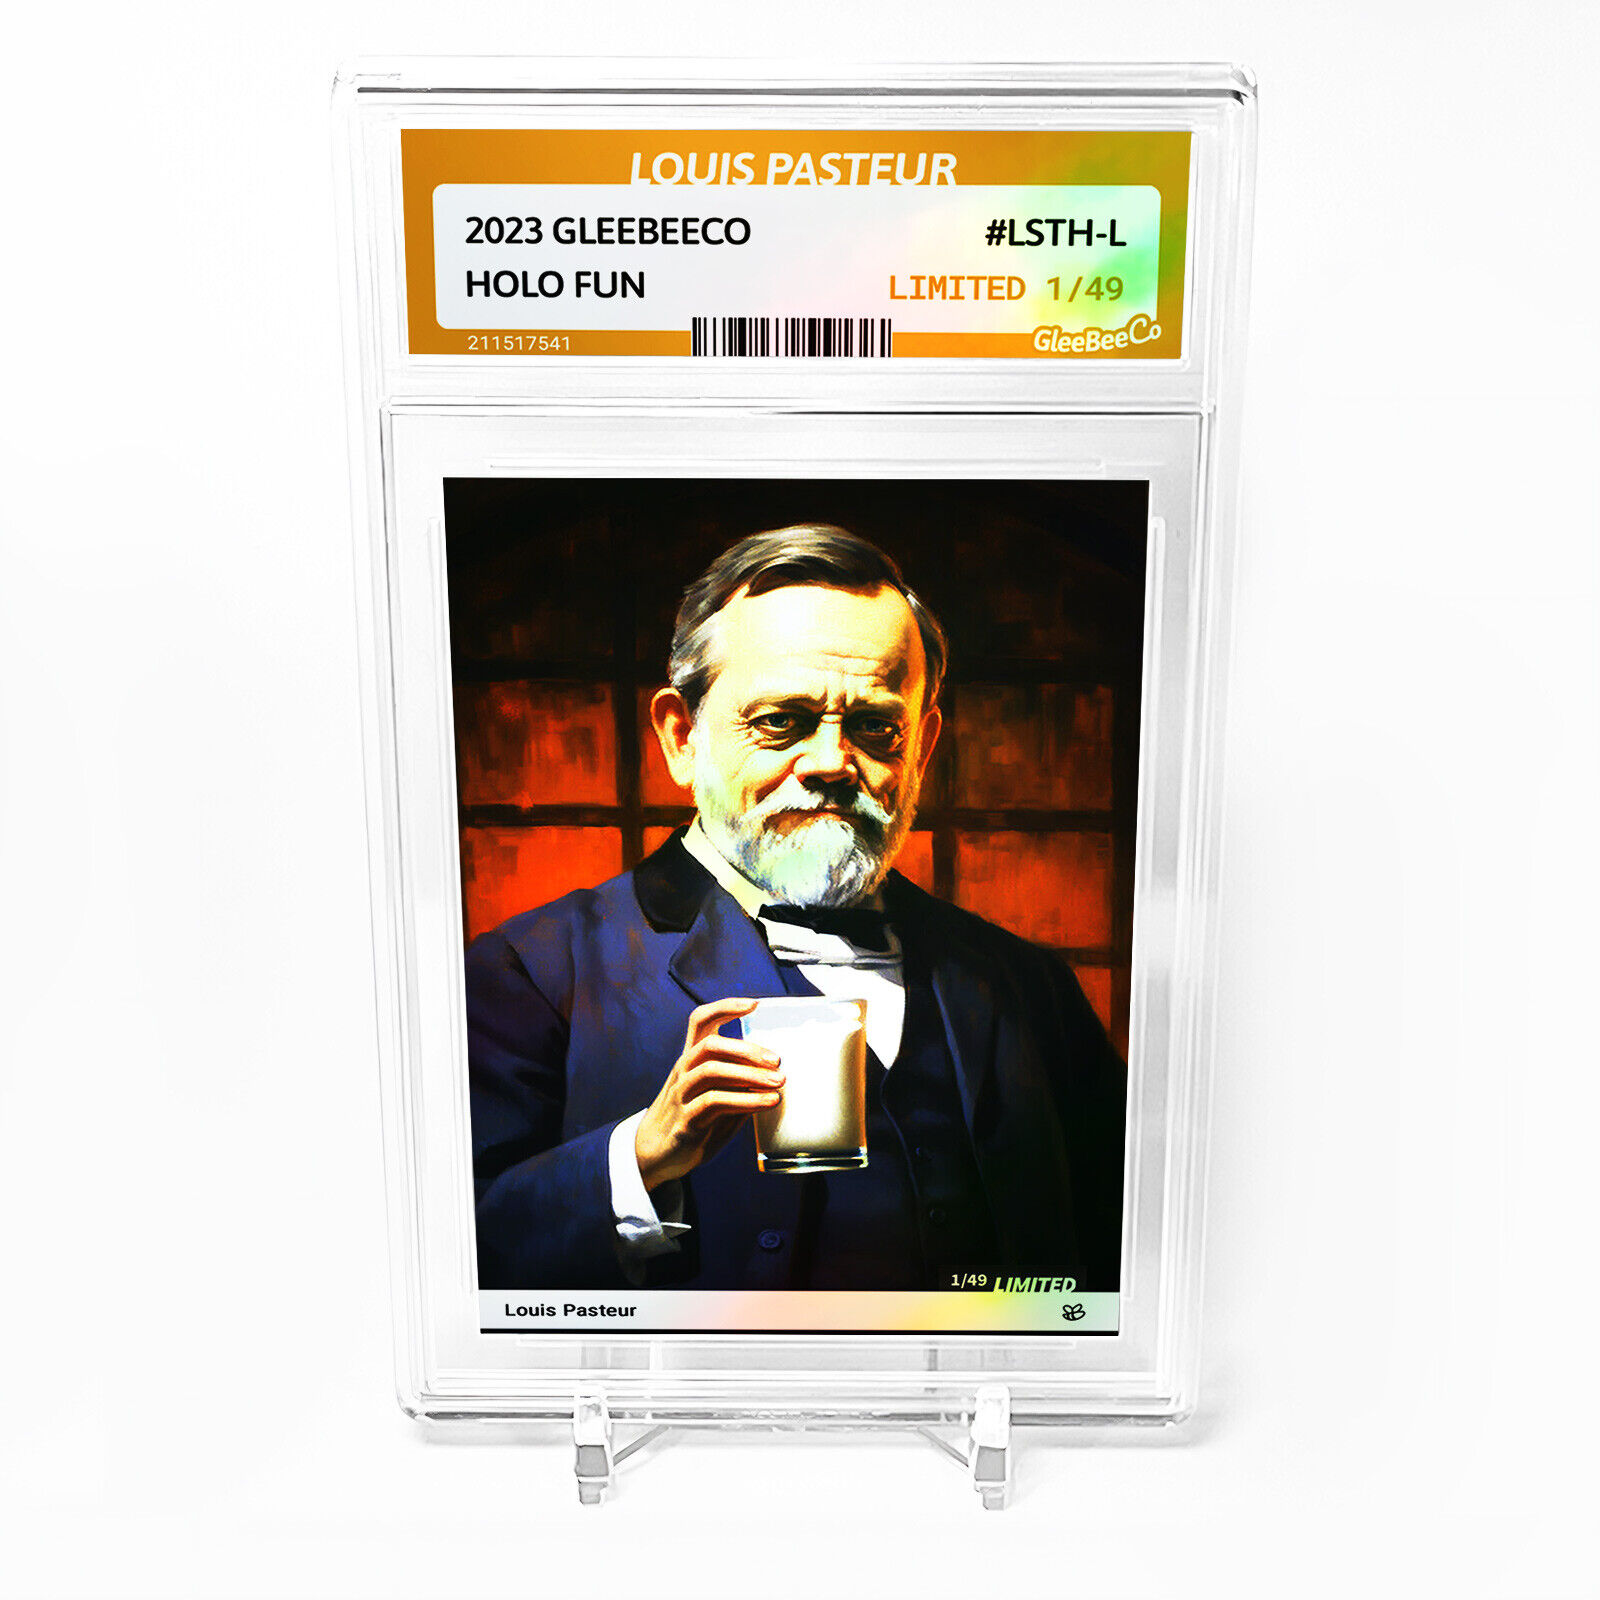 LOUIS PASTEUR Card 2023 GleeBeeCo Holo Fun Slabbed #LSTH-L Only /49